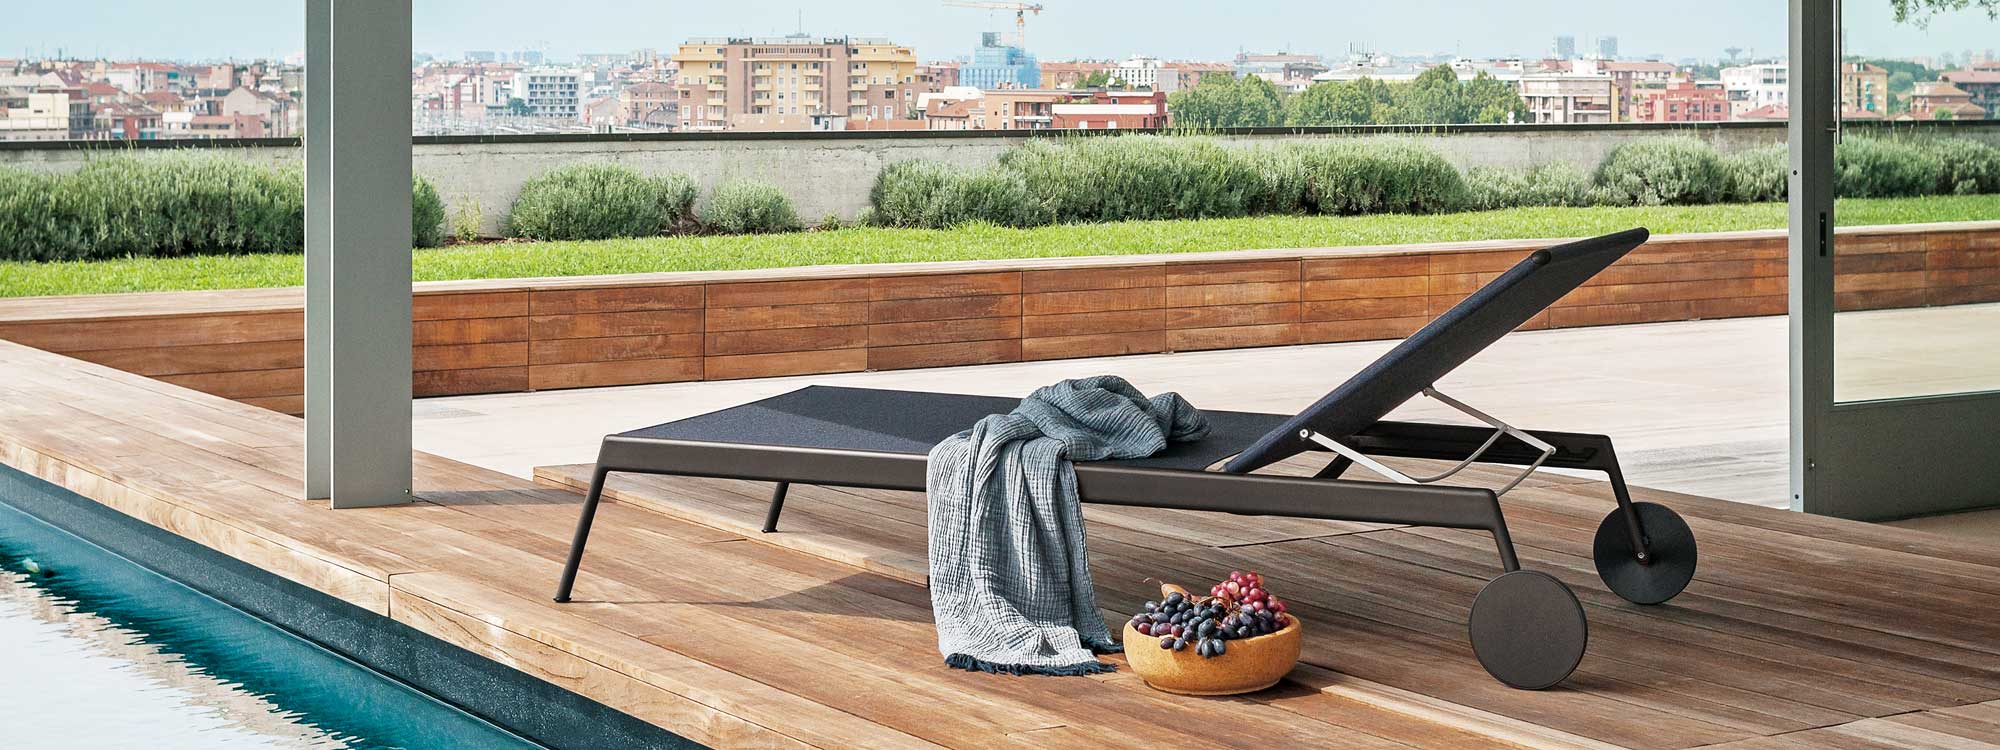 Piper modern sunbed with towel draped over it, with bowl of juicy grapes next to it.